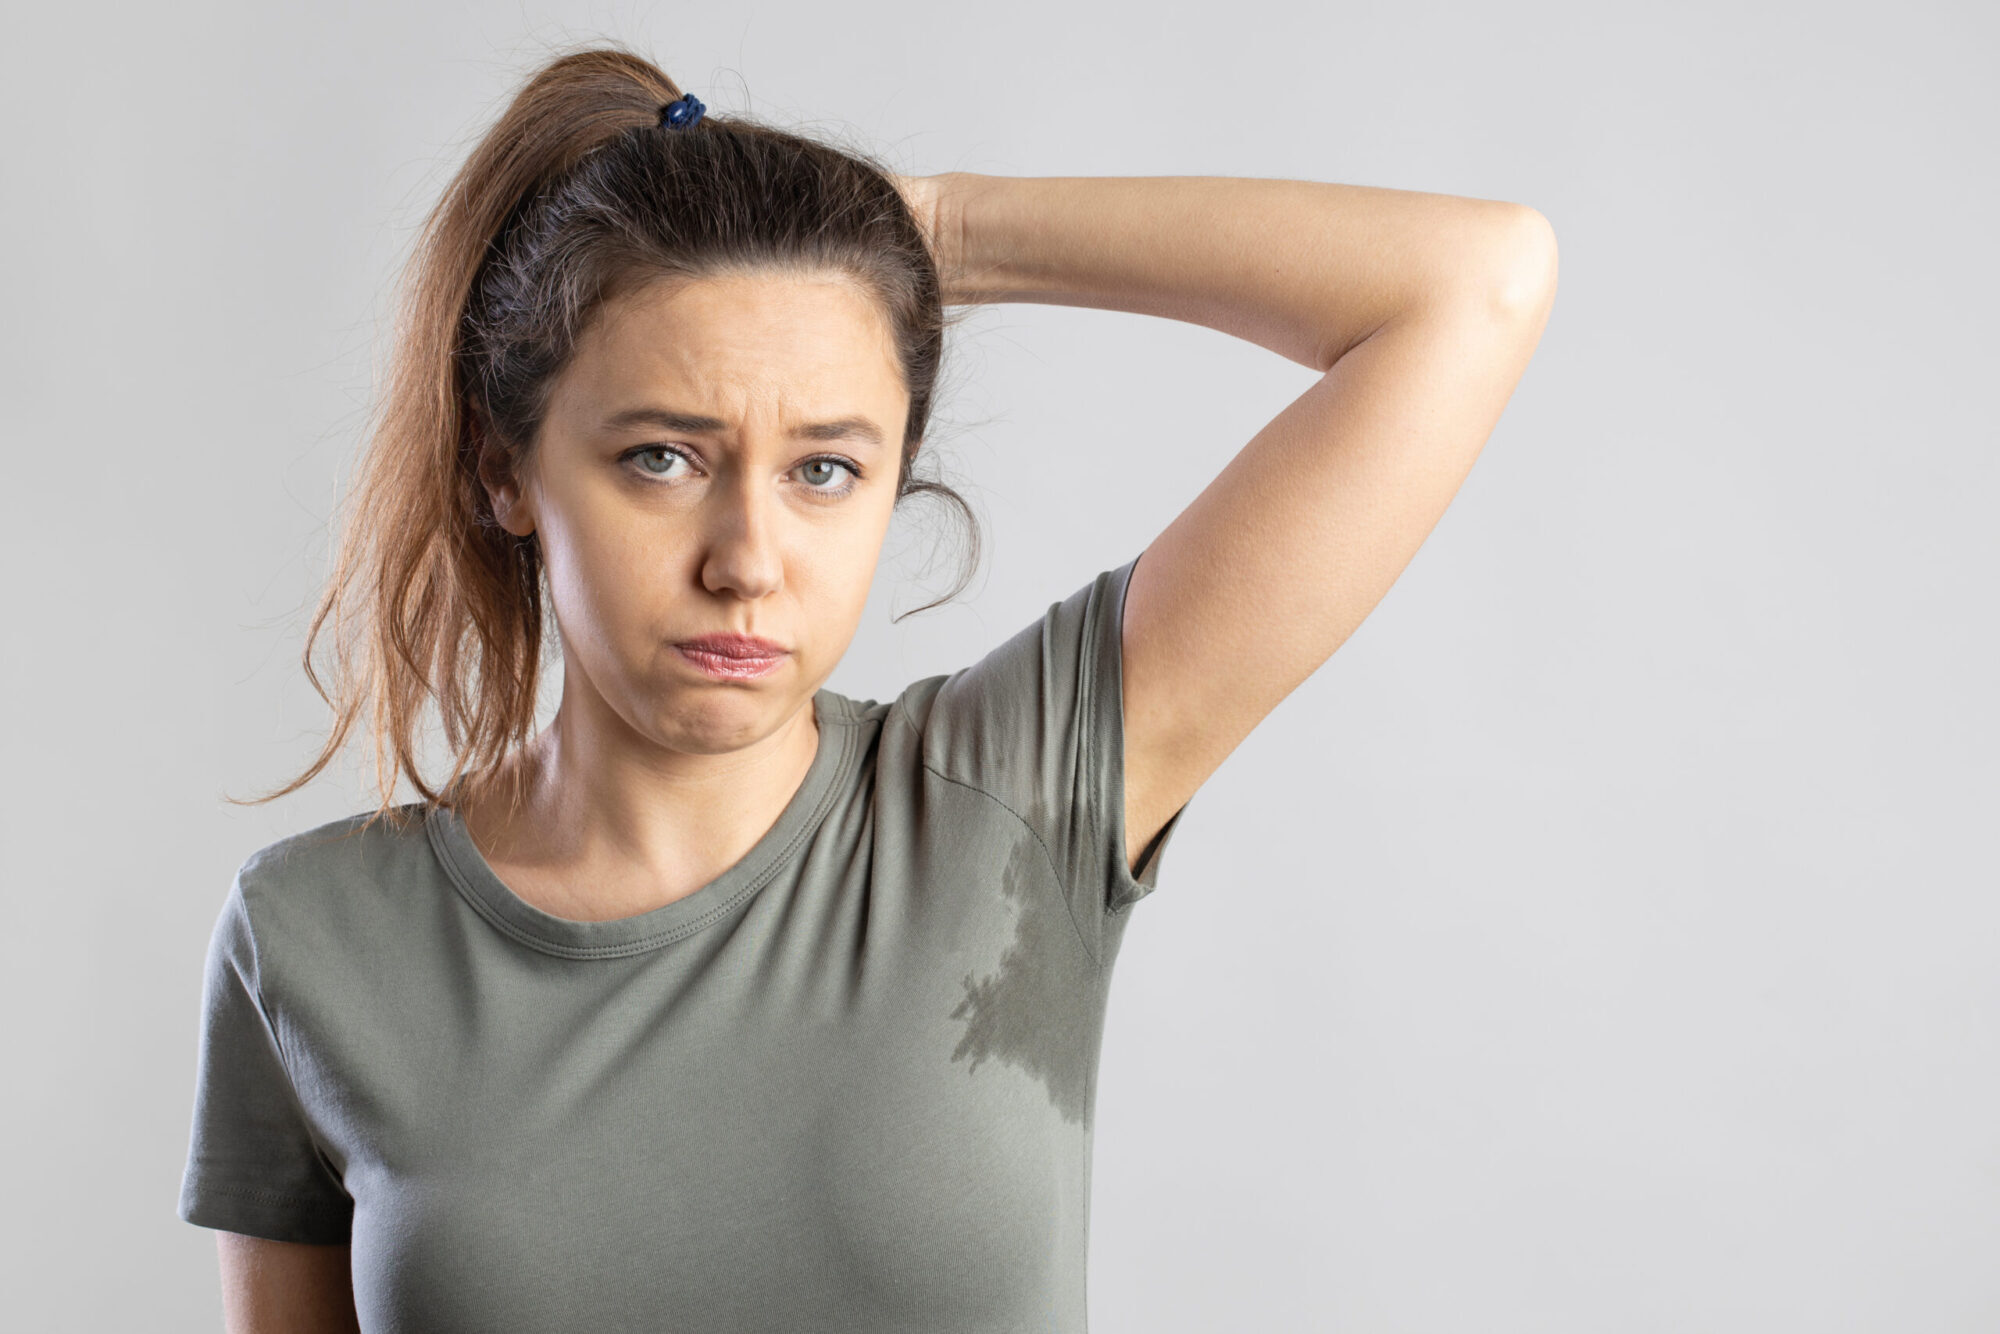 botox can treat excessive sweating, hyperhidrosis